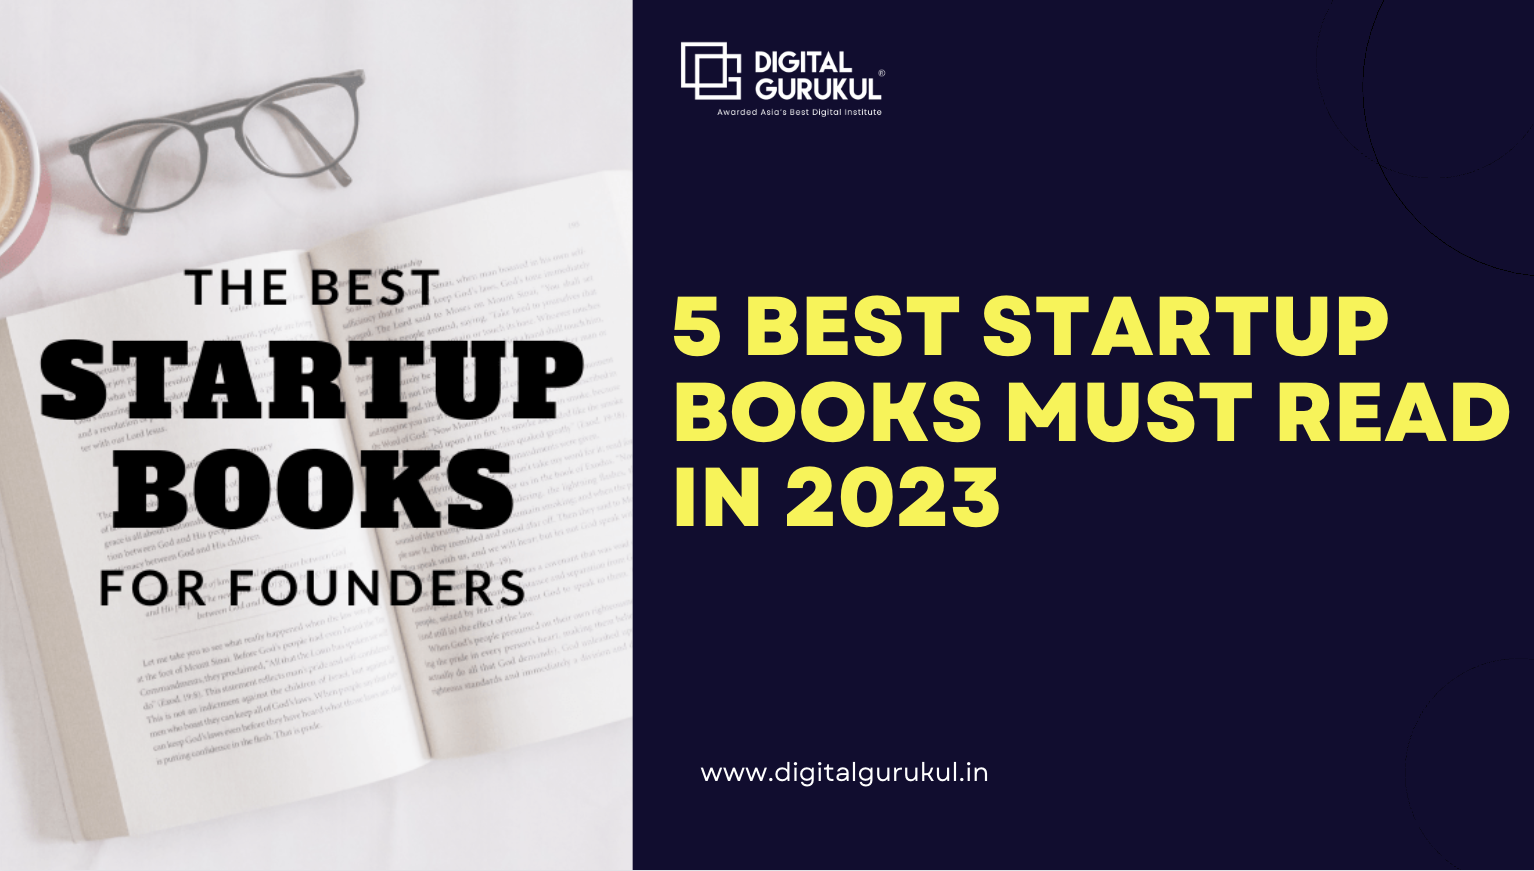 5 Best startup books must read in 2023